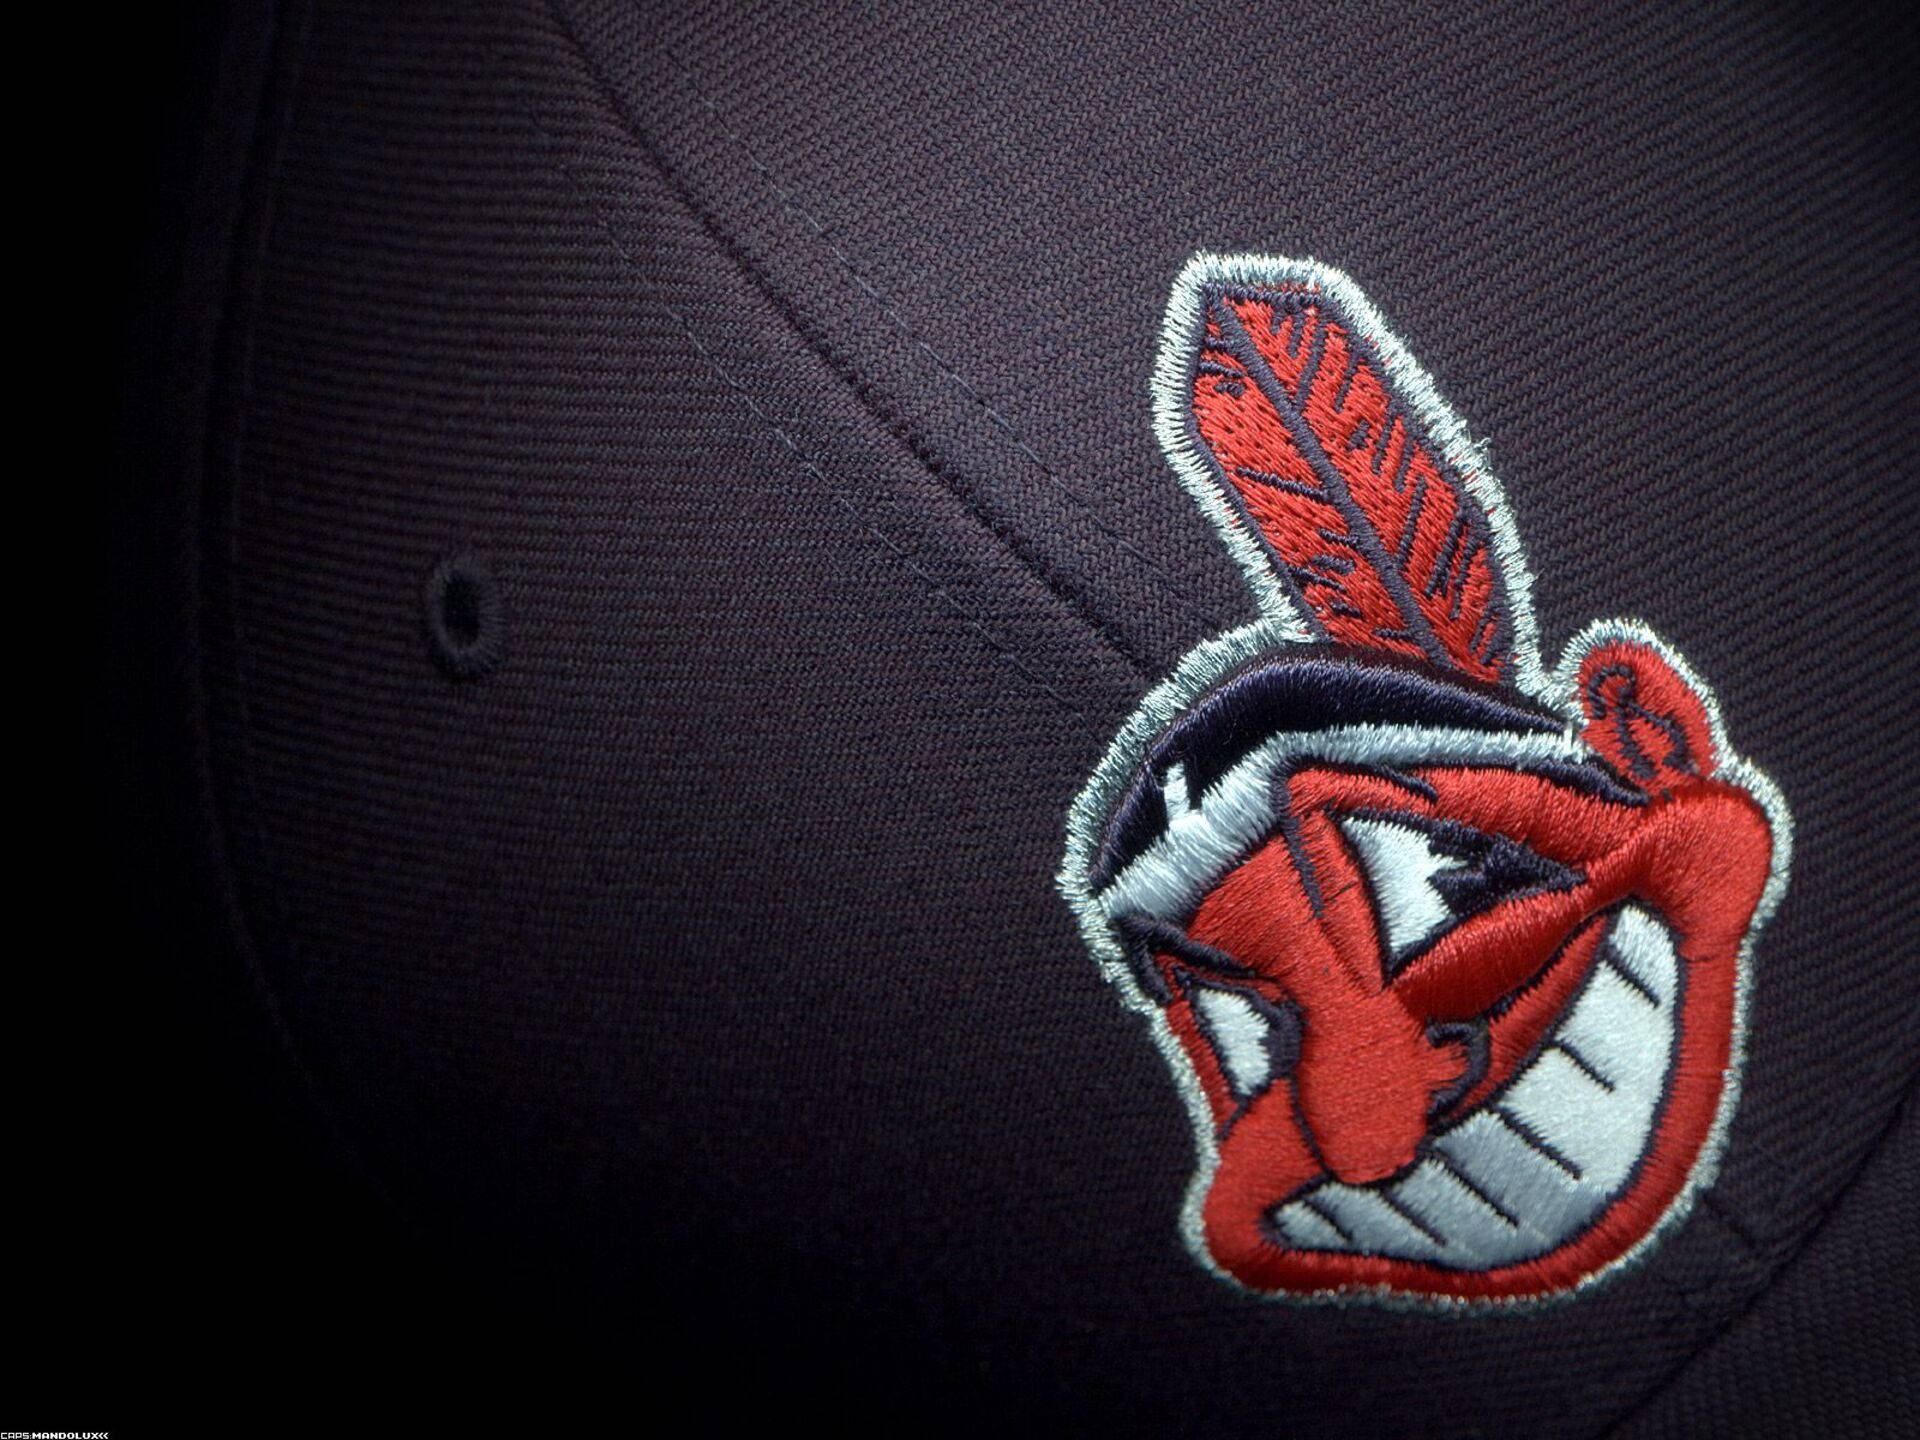 Top 999+ Cleveland Indians Wallpaper Full HD, 4K Free to Use